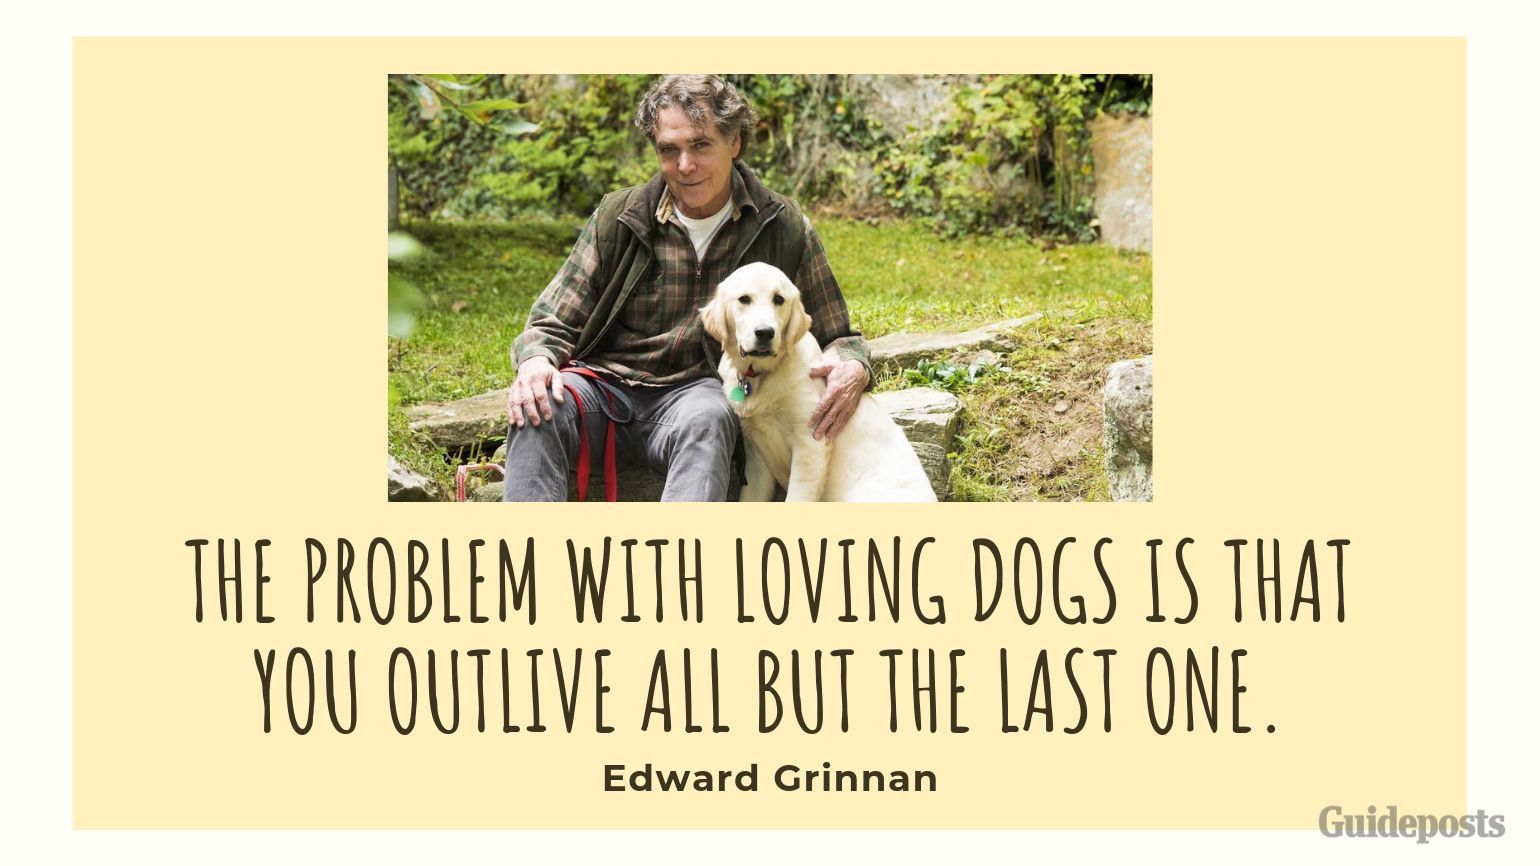 Sentimental Dog Quote: The problem with loving dogs is that you outlive all but the last one. —Edward Grinnan